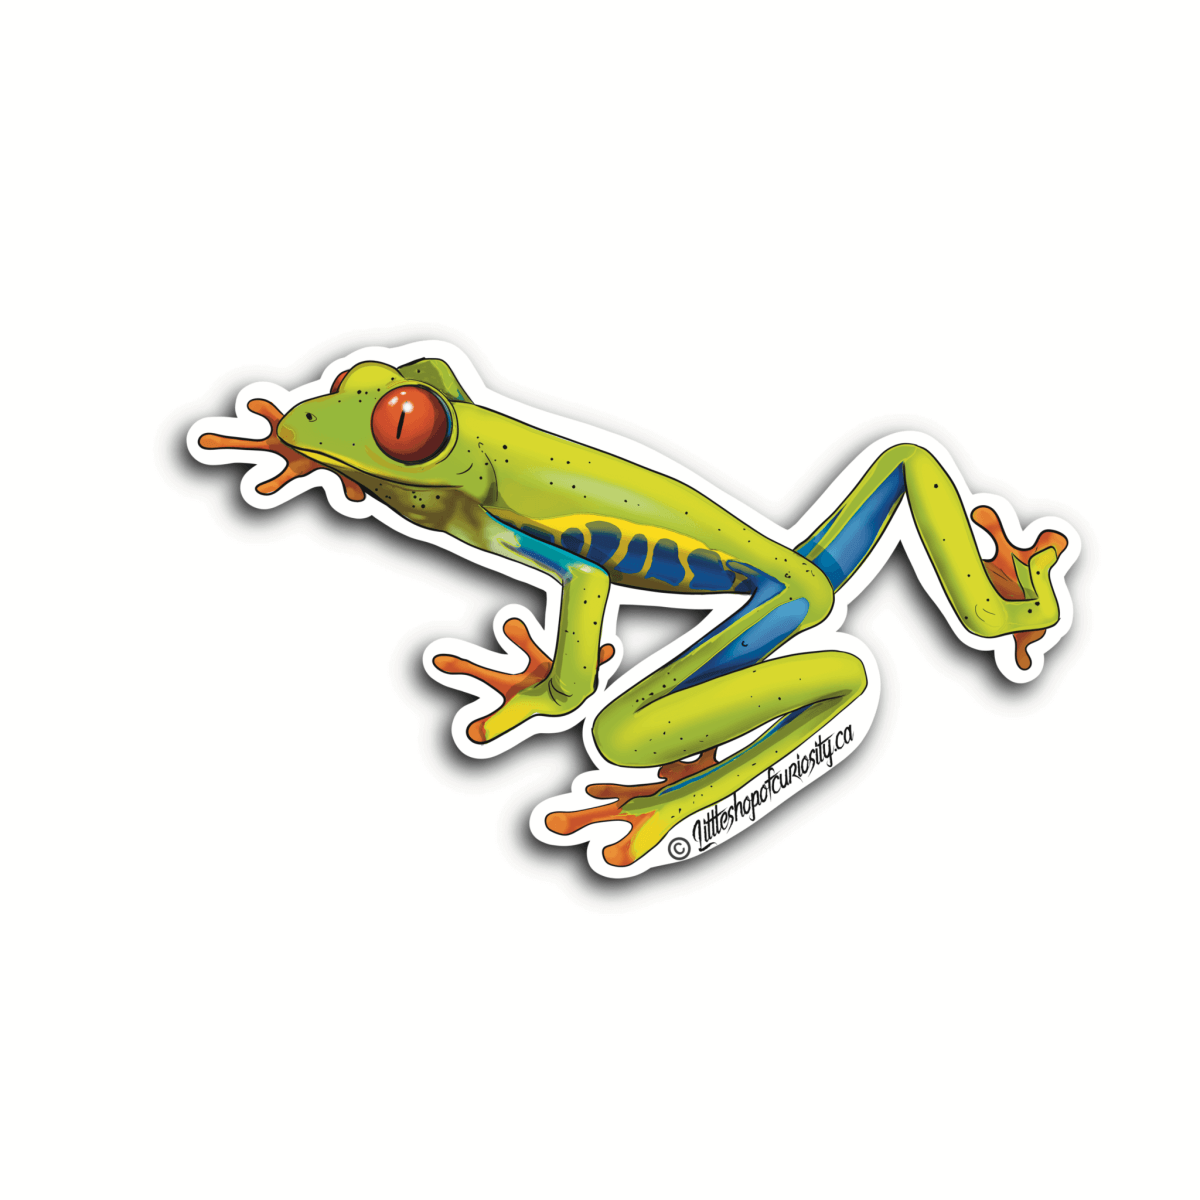 Red-eyed Tree Frog Sticker - Colour Sticker - Little Shop of Curiosity